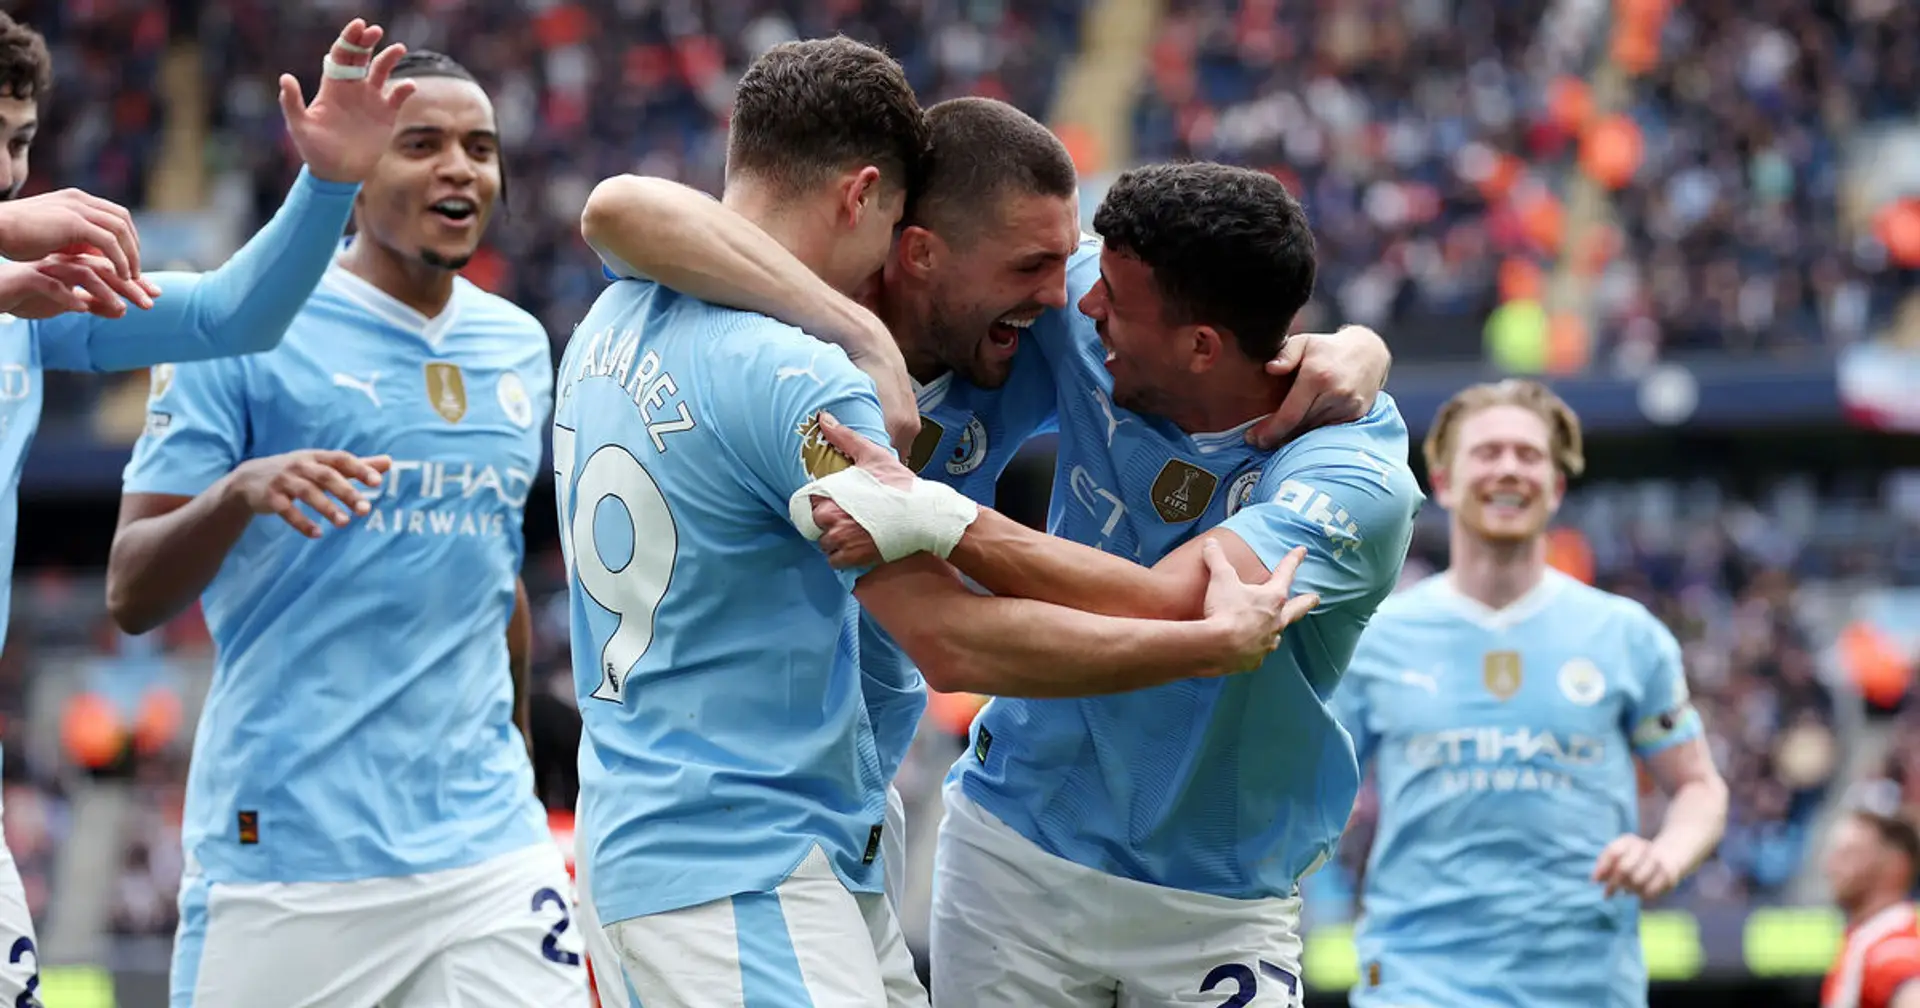 Title race update: Man City beat Luton to move past Arsenal to the top